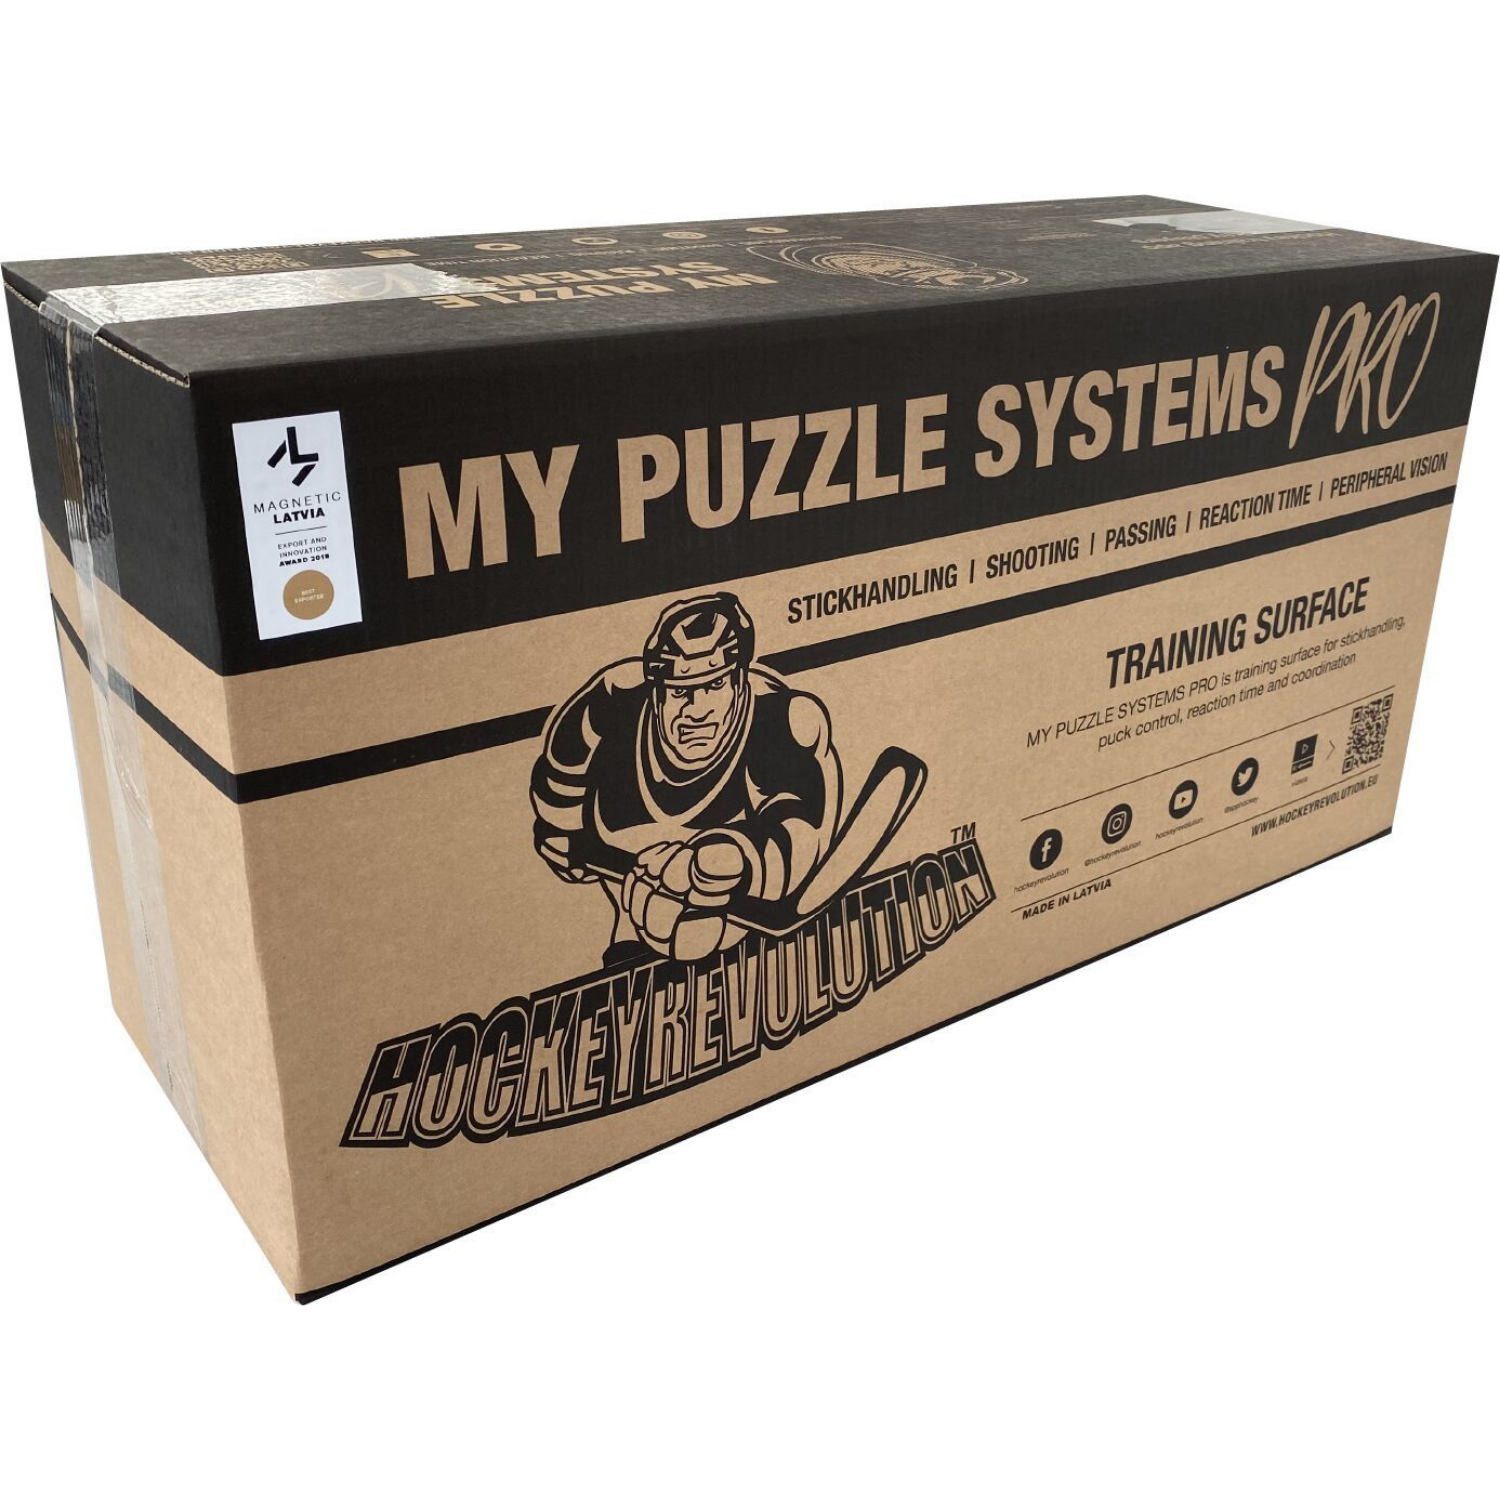 My Puzzle Systems Pro